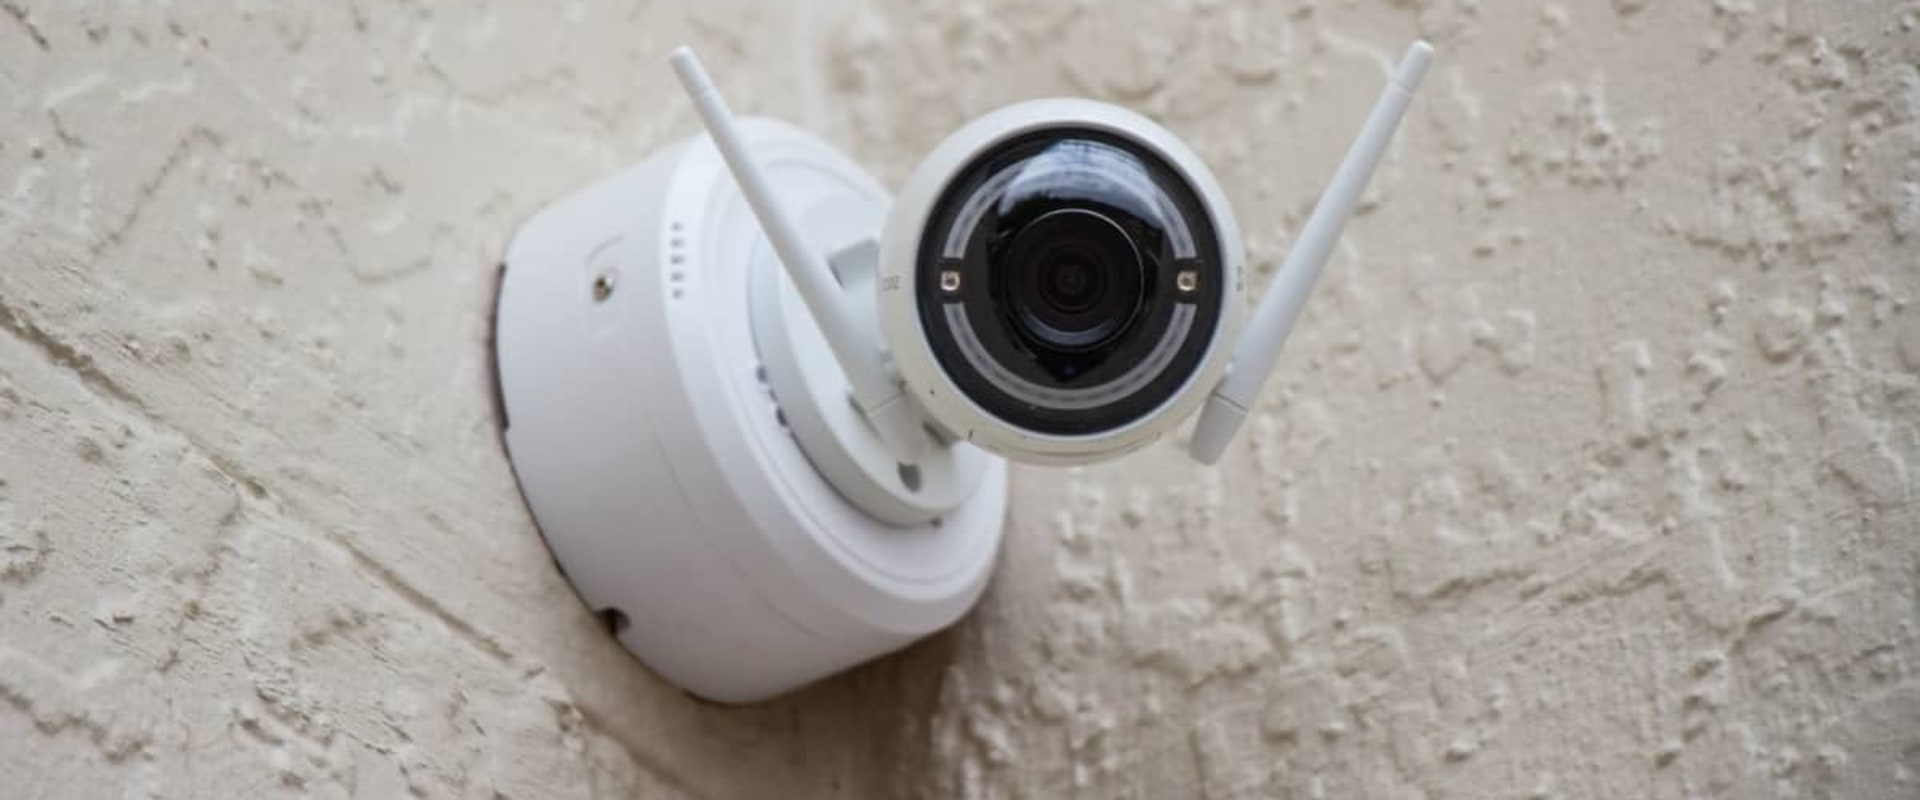 How to Troubleshoot Common Issues with Security Cameras